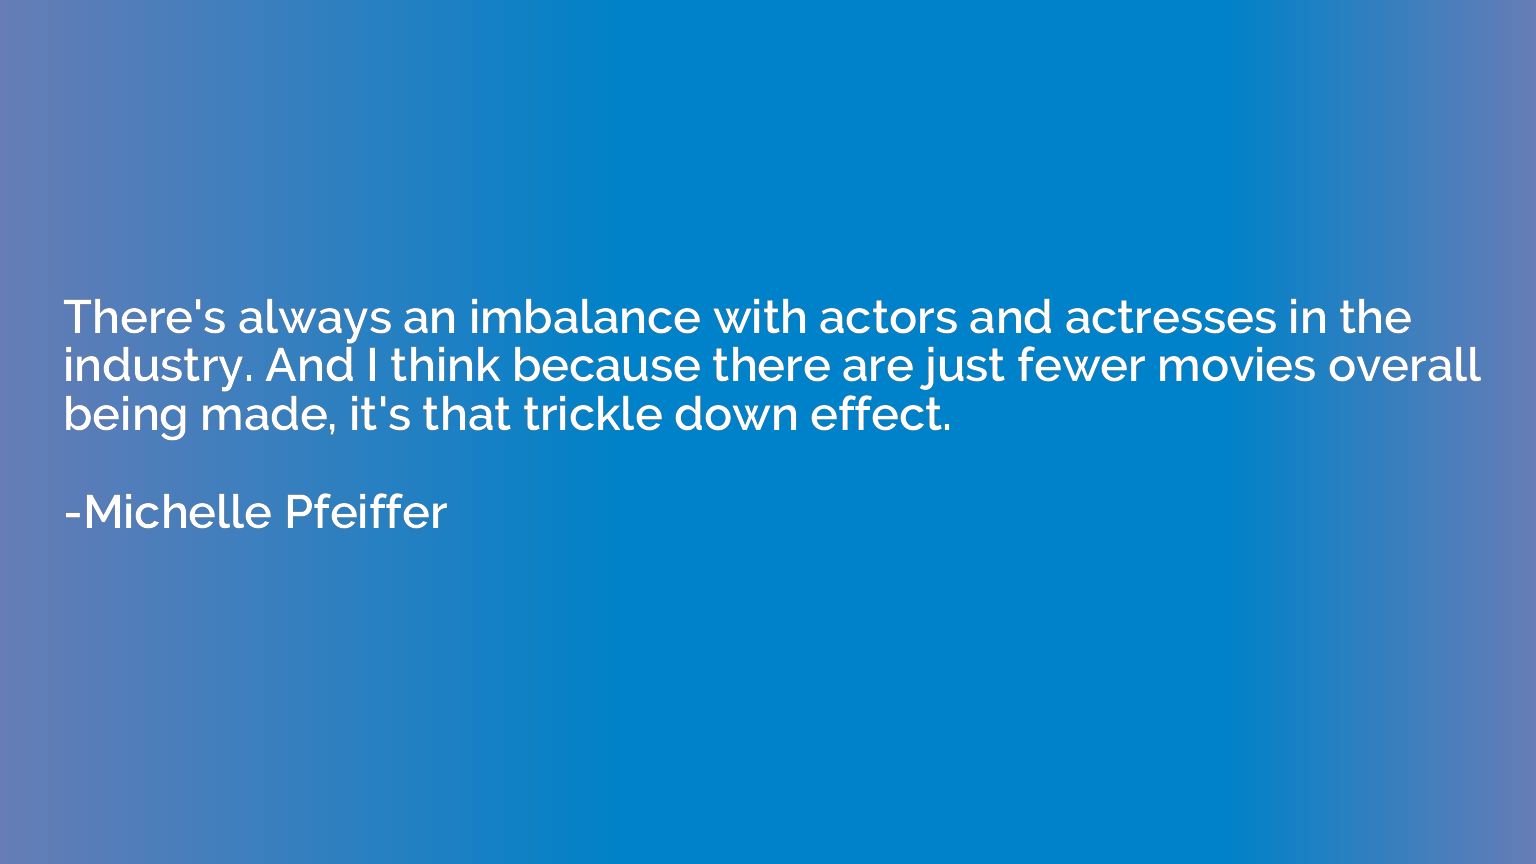 There's always an imbalance with actors and actresses in the